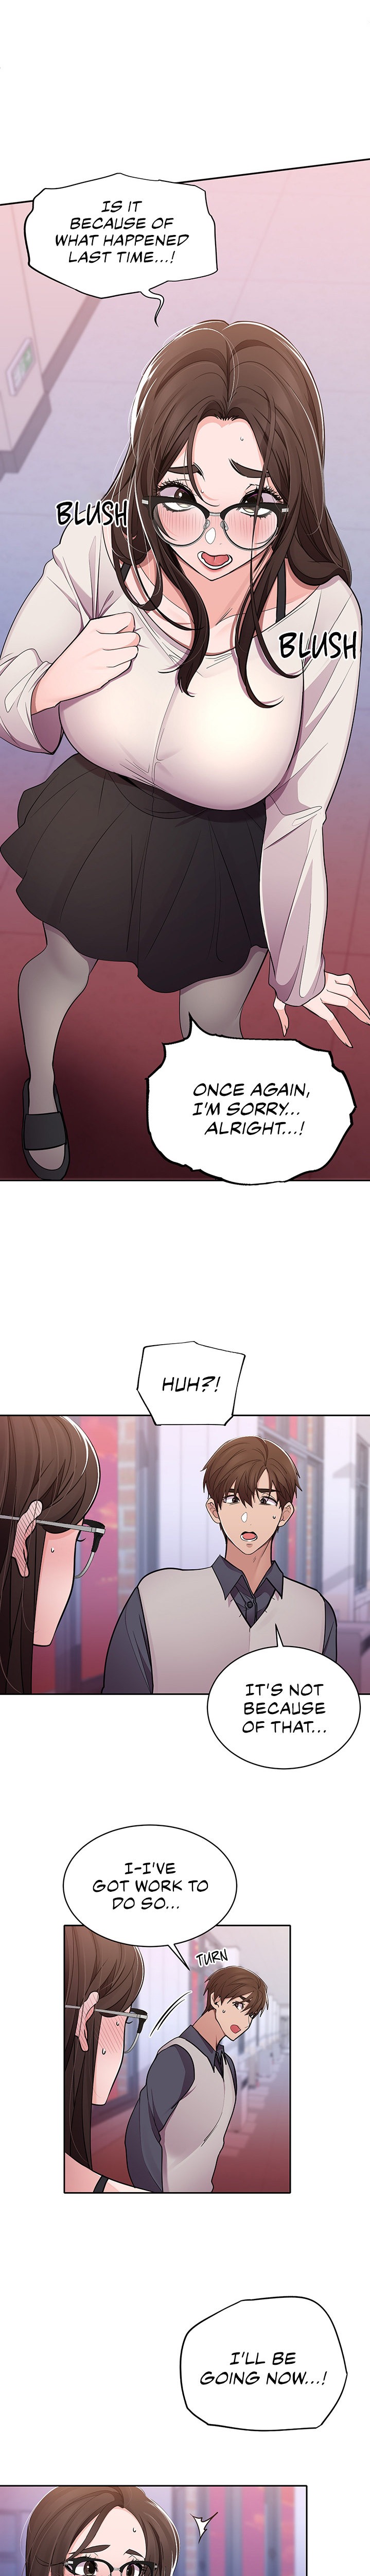 Meeting you again - Chapter 30 Page 9